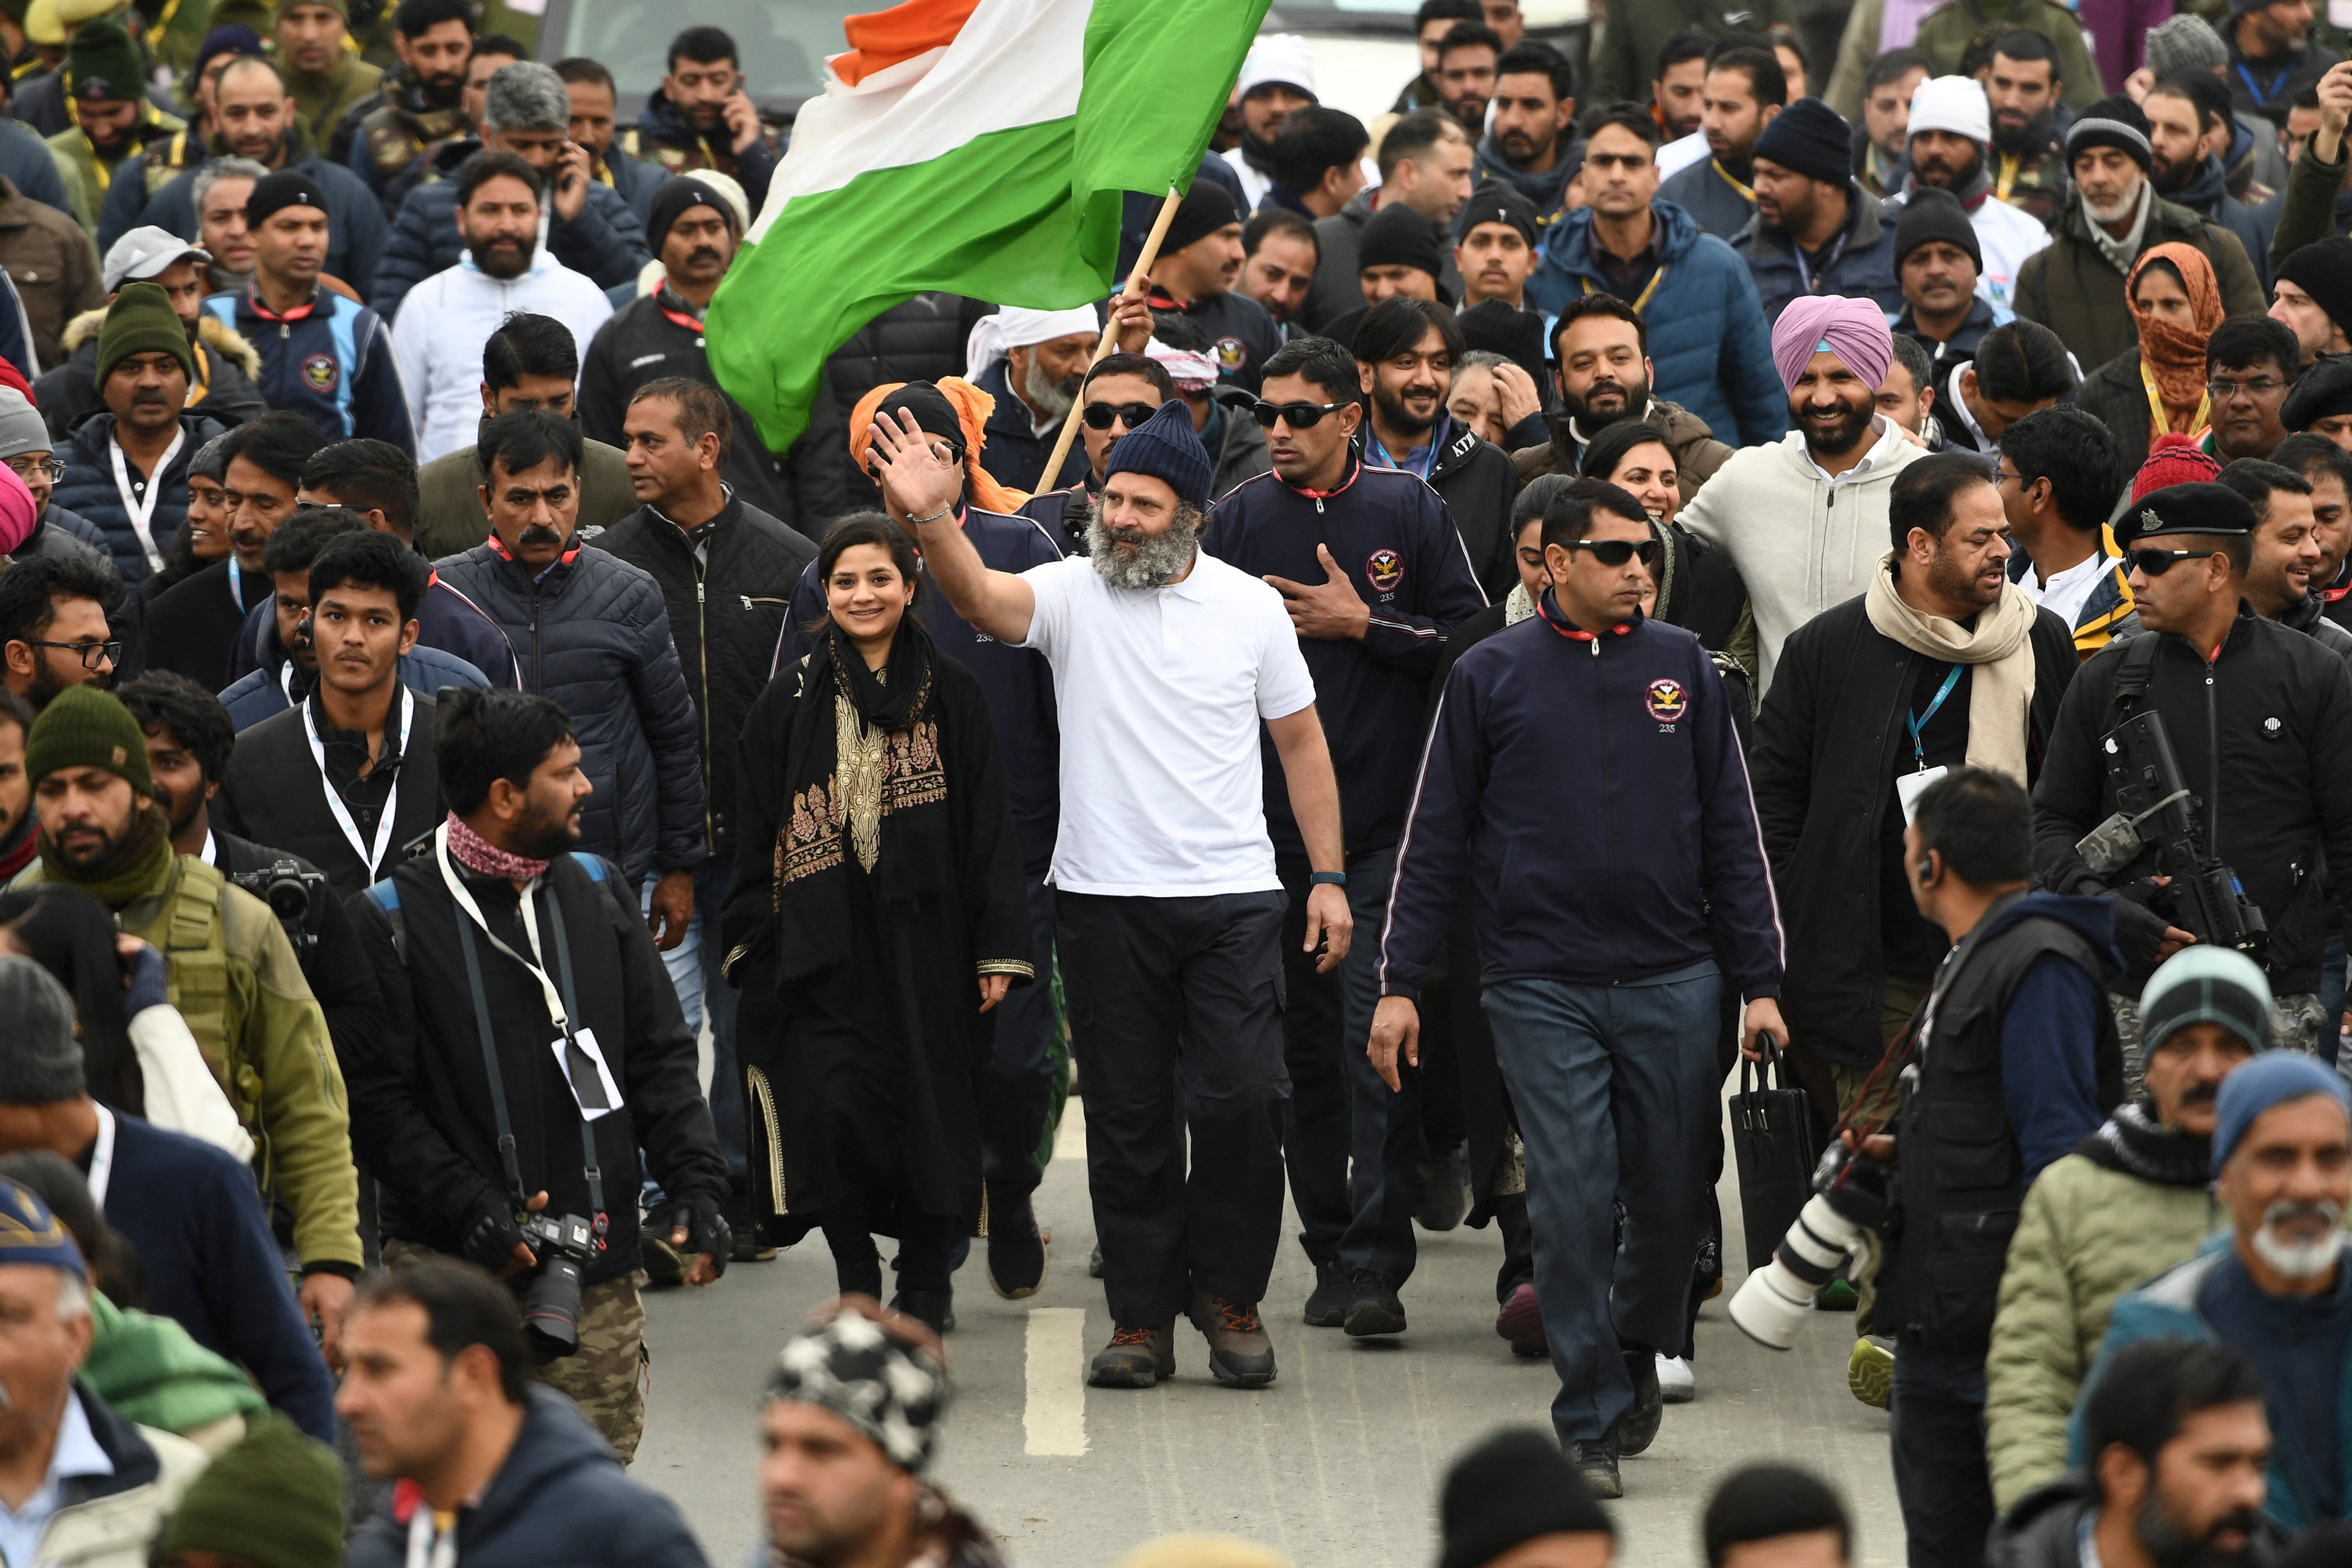 Indian Congress leader Rahul Gandhi (centre, in white) with Iltija Mufti (left) daughter of former chief minister of Jammu and Kashmir Mehbooba Mufti (not in photo) walk during the ‘Bharat Jodo Yatra’ in Anantnag, south Kashmir